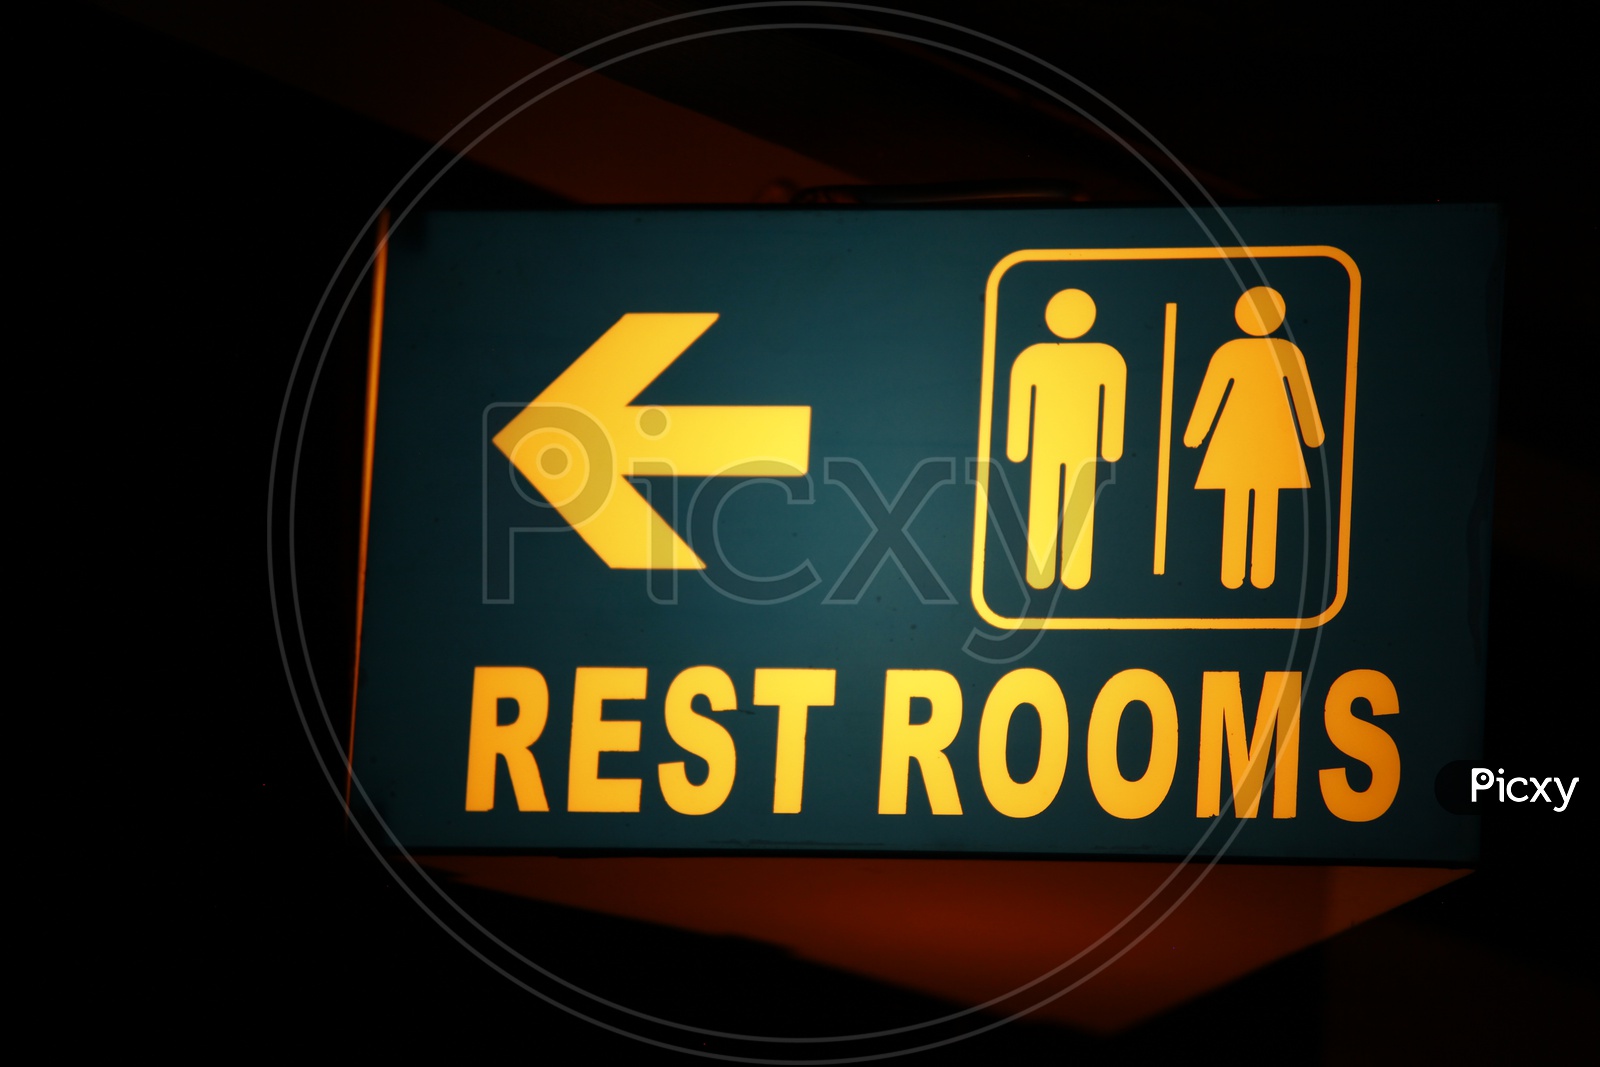 Rest rooms indication board